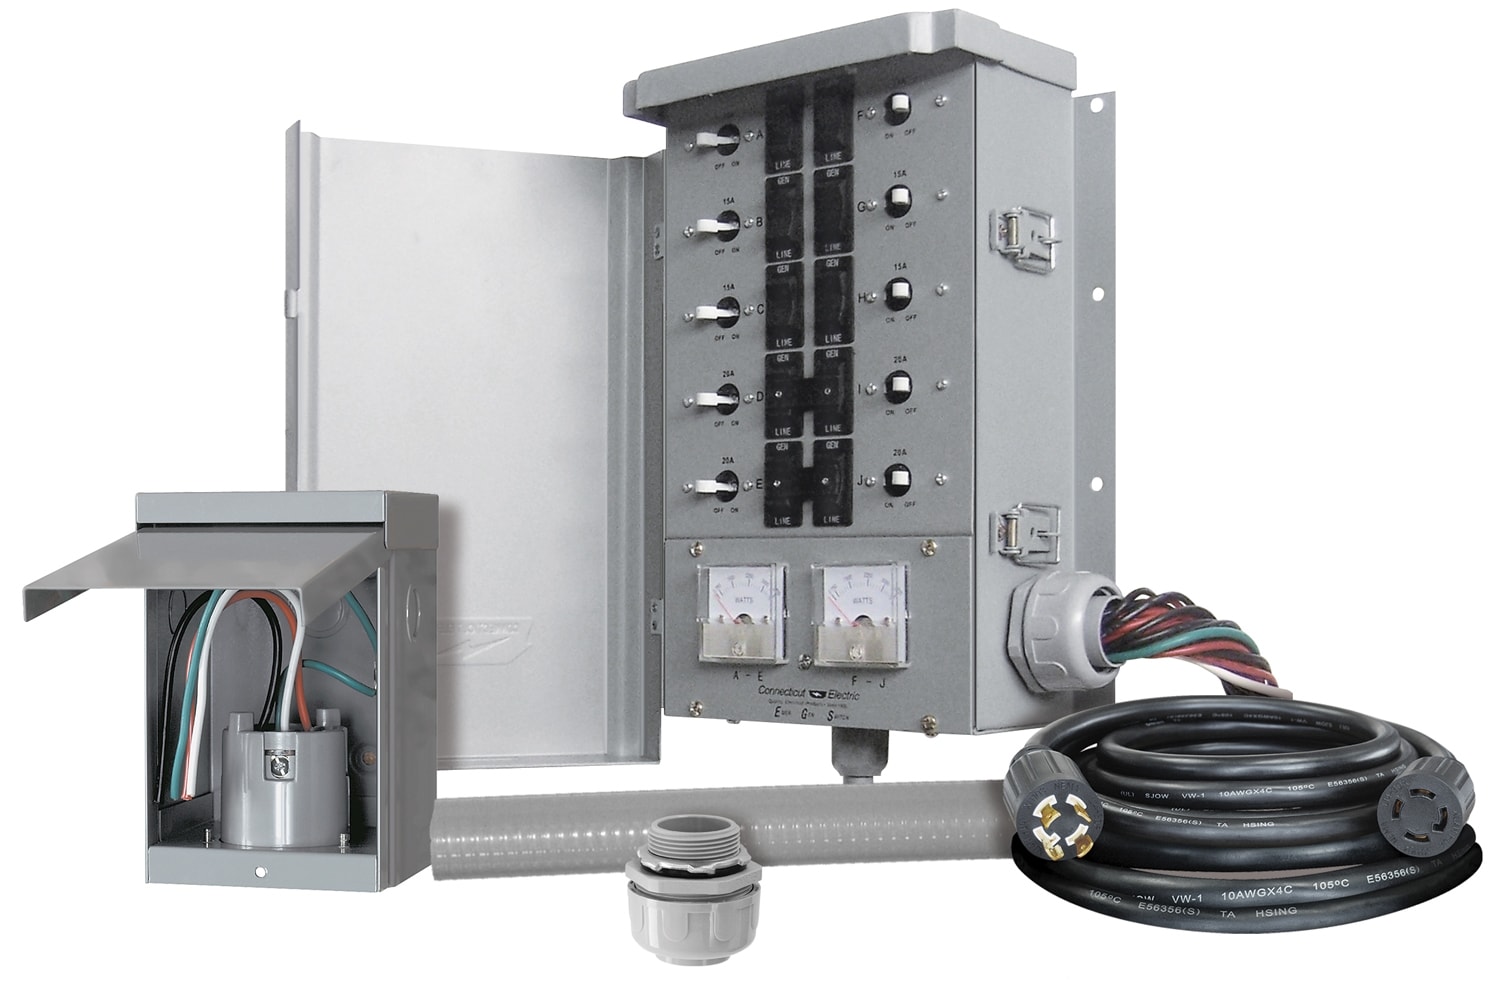 Connecticut Electric 30-Amp Manual Transfer Switch Kit with Inlet Box,  Power Cord, and Wiring Harness - 7500W Capacity, ETL Safety Listed